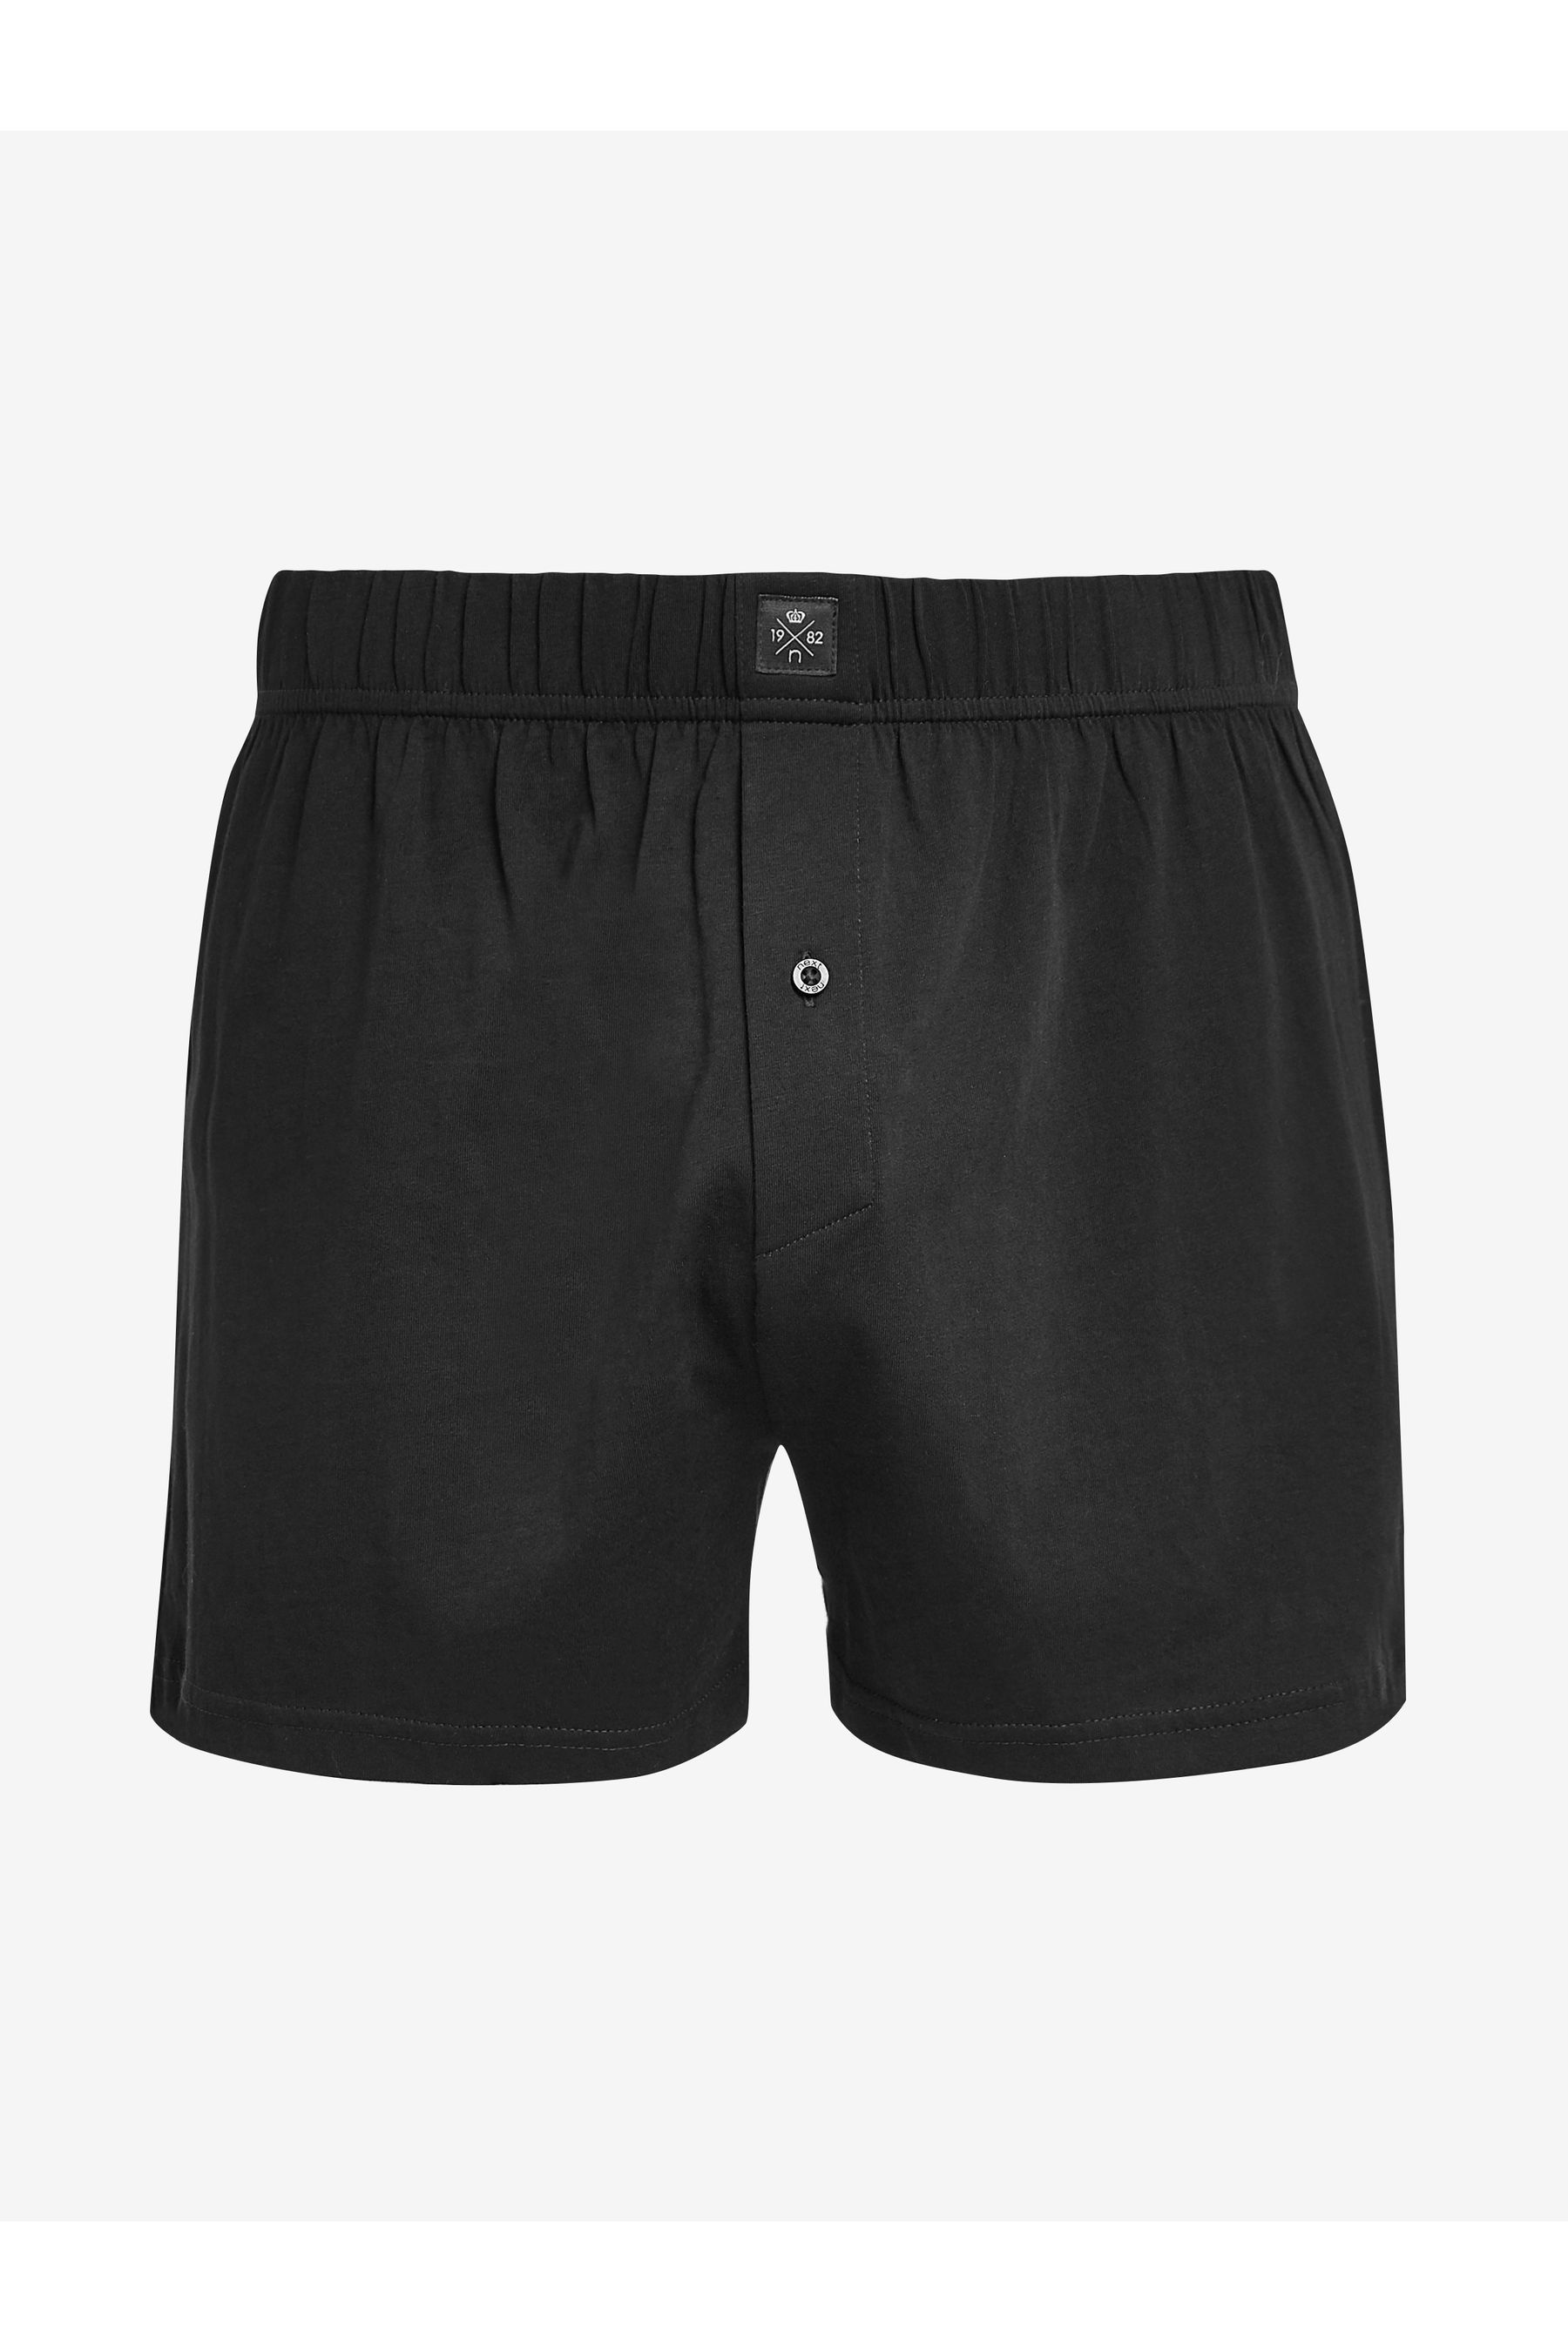 Buy Essential Black 4 pack Essential Jersery Boxers 4 PK from the Next ...